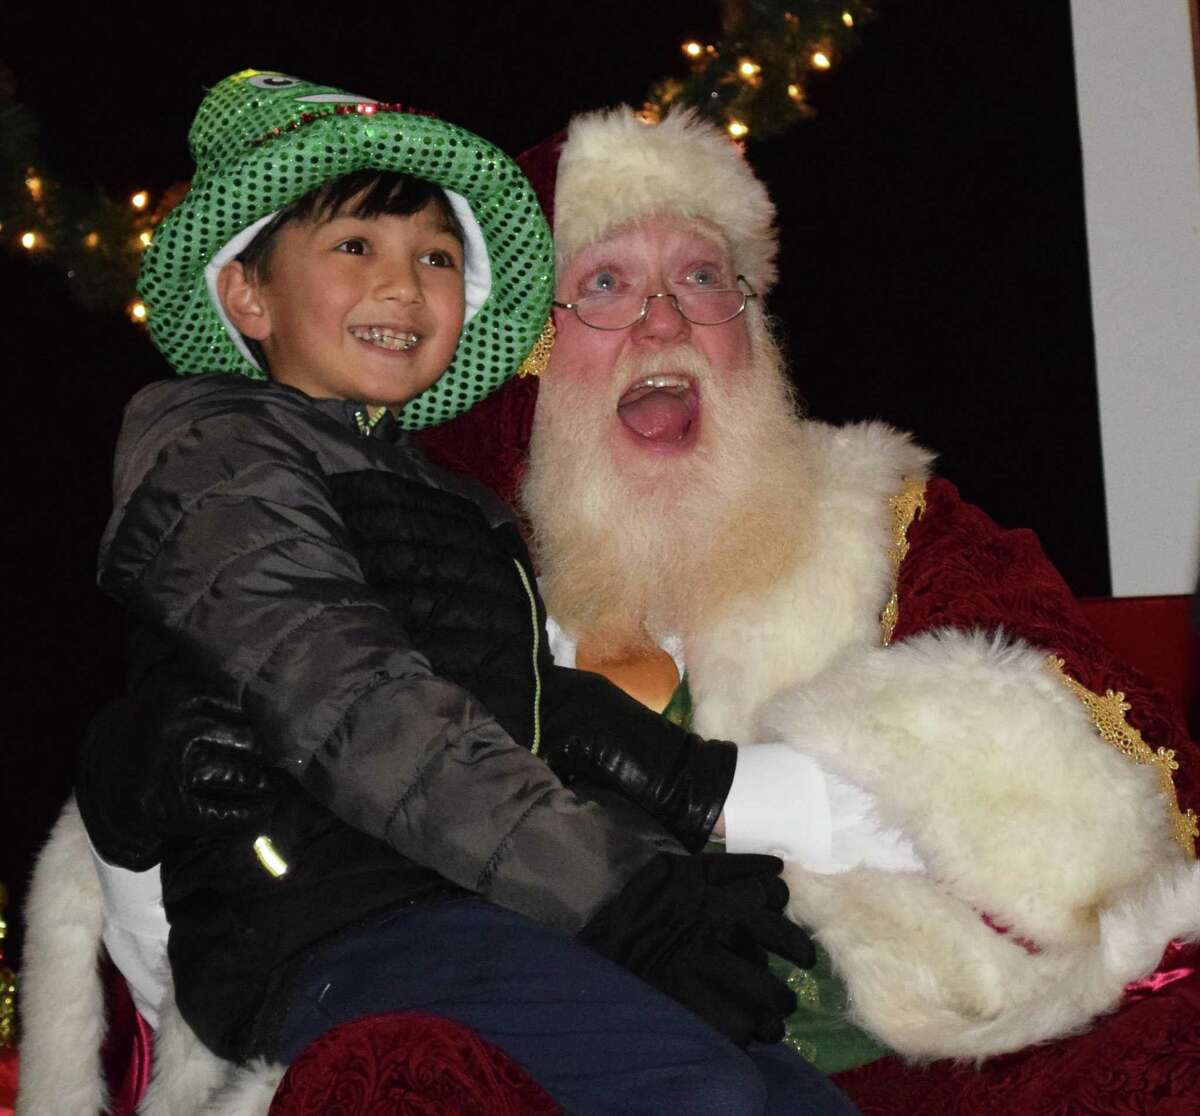 Spectrum/The annual lighting of the trees on the Village Green in New Milford was held Nov. 24, 2018. The event was held by the Greater New Milford Chamber of Commerce. The trees are put up annually by the United Methodist Men at the New Milford United Methodist Church. Above, Joshua Violette, 9, and Santa pose for a photograph following the lighting of the trees.